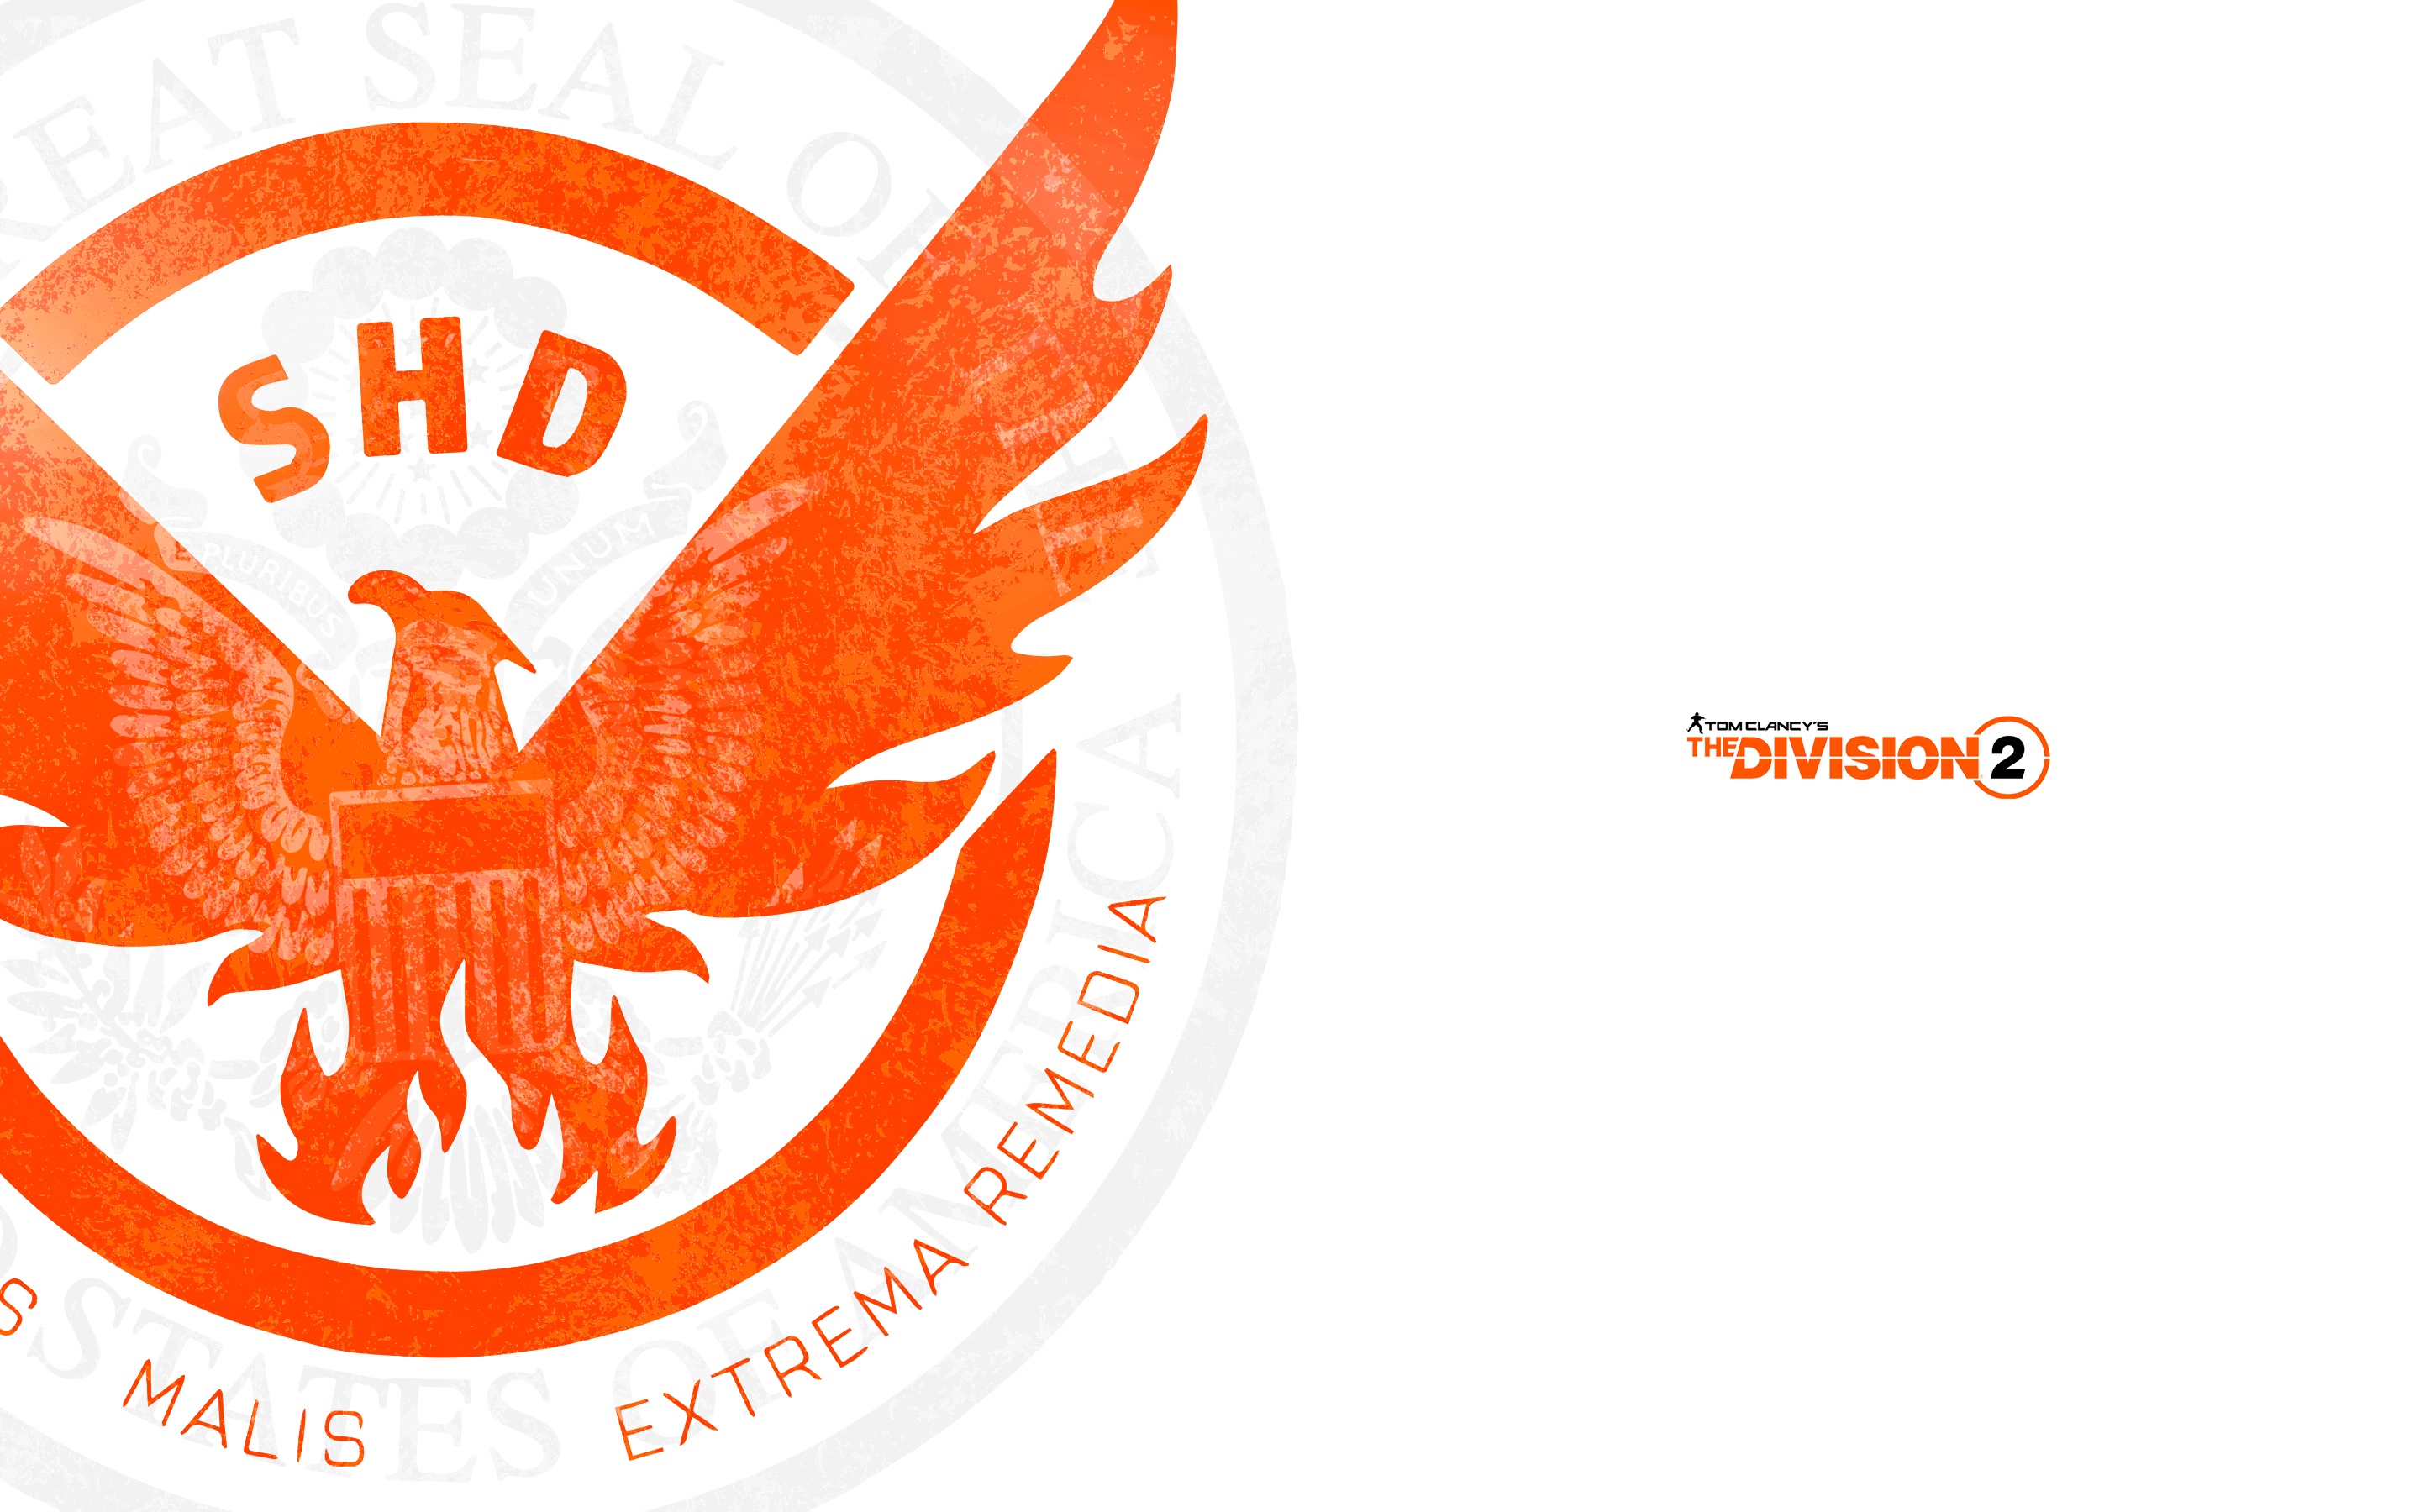 The Division 2 Wallpapers Desktop Mobile Division 2 Wallpapers Gameguidehq